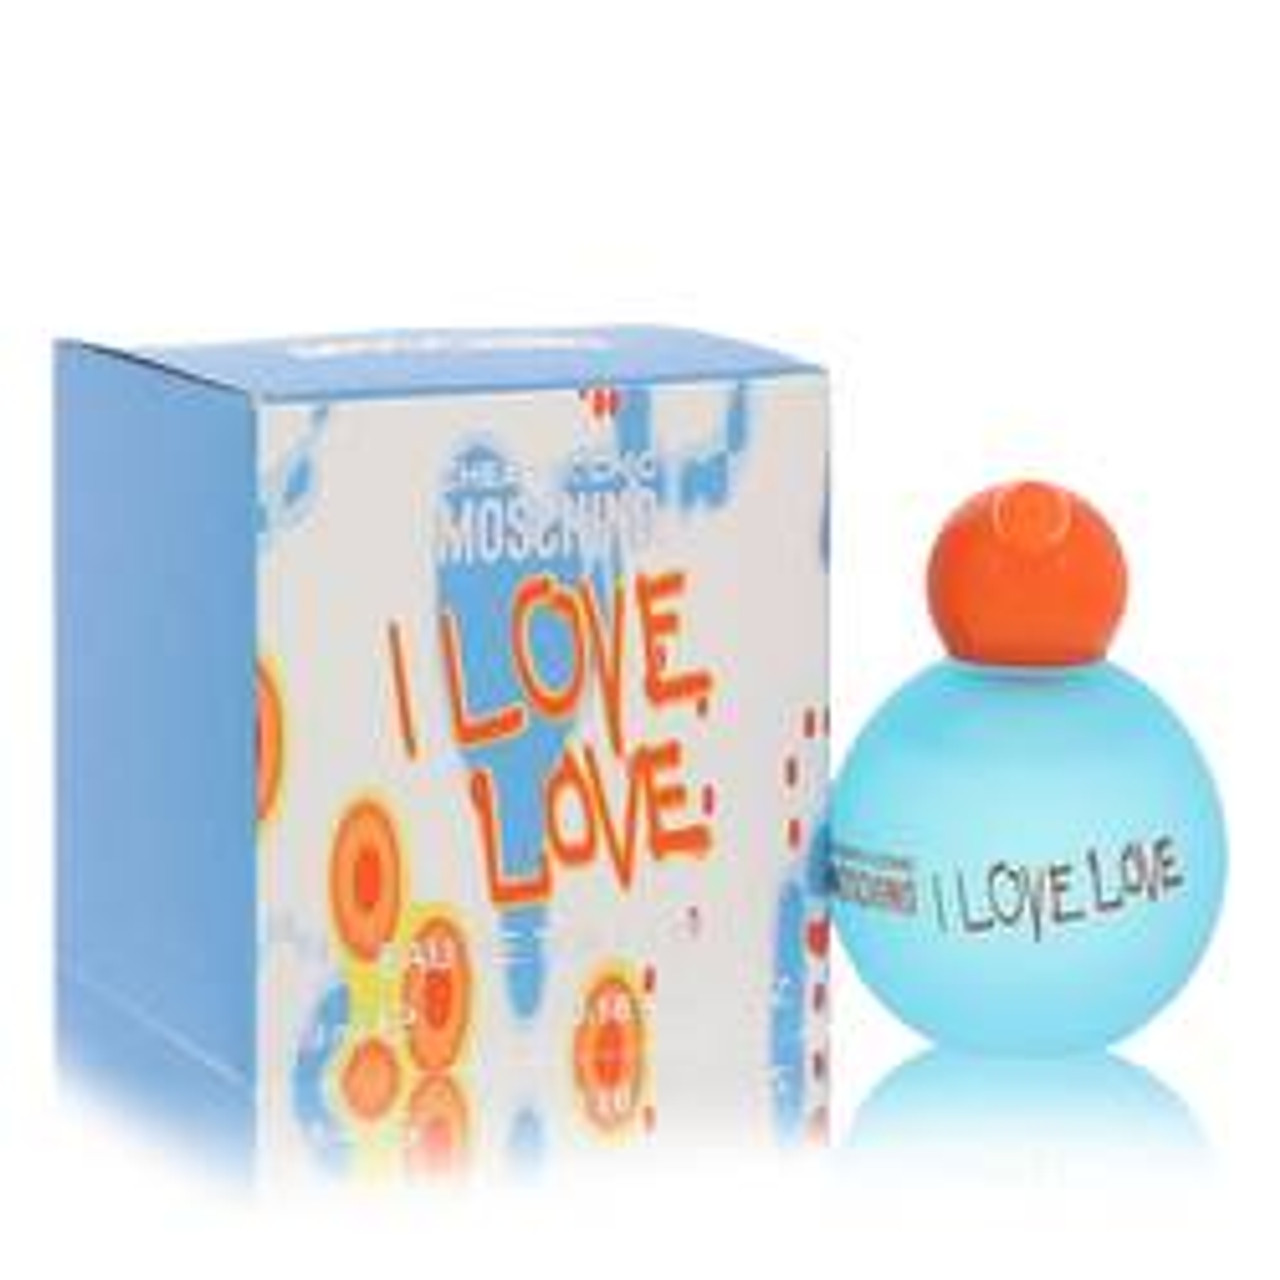 I Love Love Perfume By Moschino Mini EDT 0.17 oz for Women - [From 48.00 - Choose pk Qty ] - *Ships from Miami